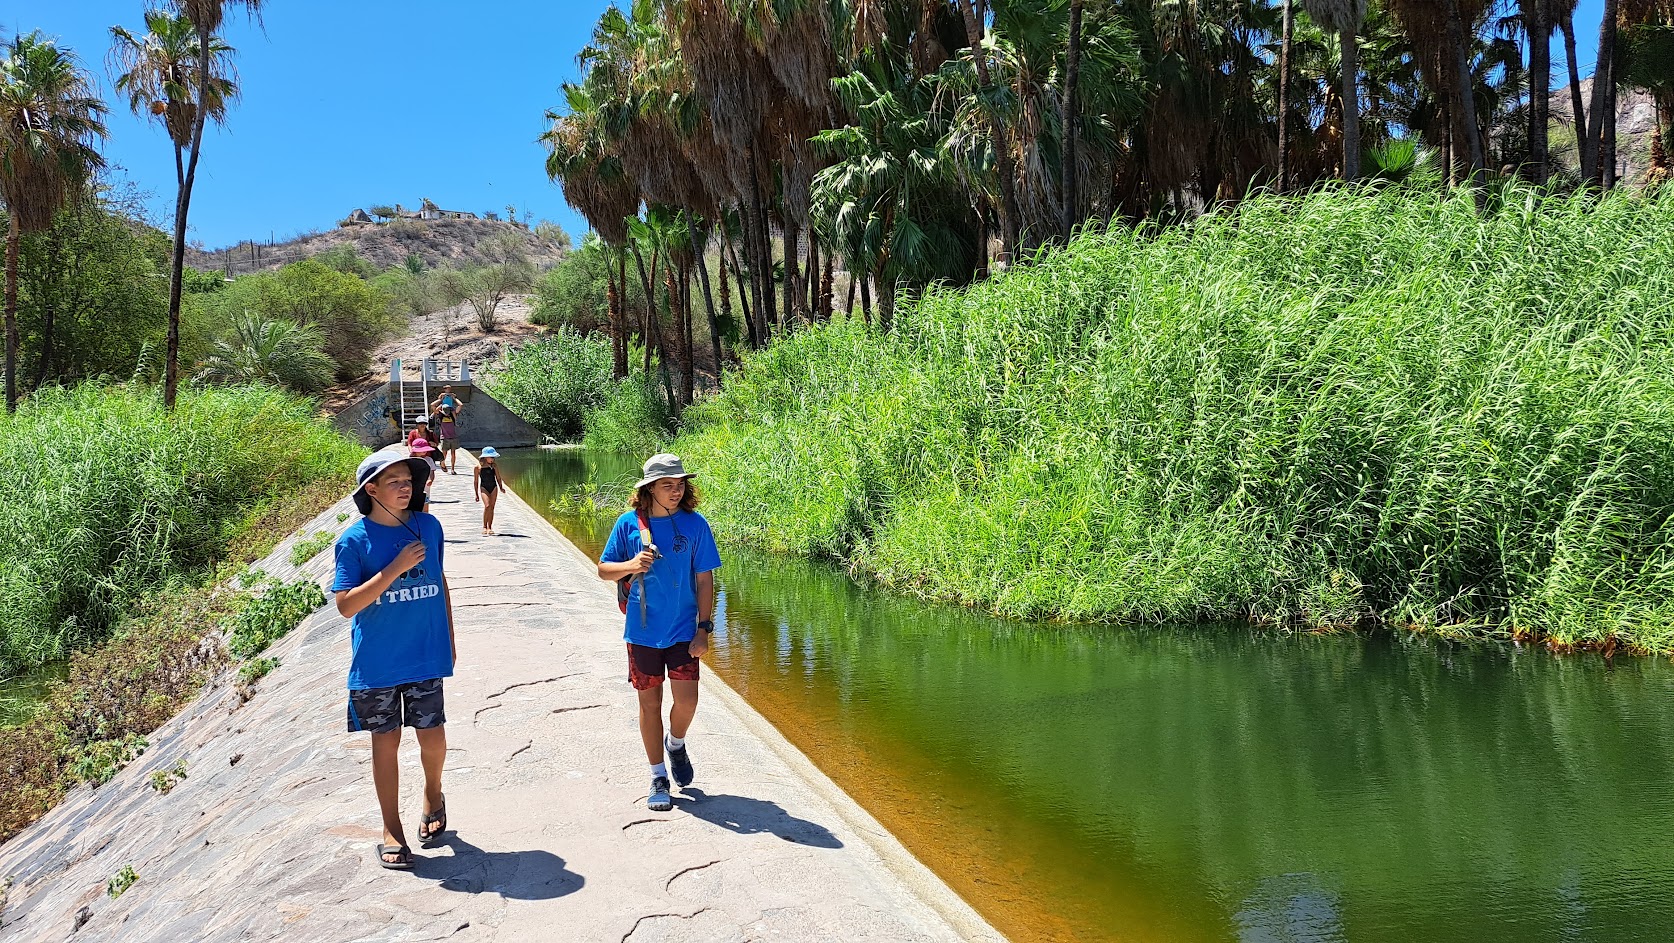 Two people walking along a narrow concrete walkway next to a body of water with thick reeds and palm trees behind it